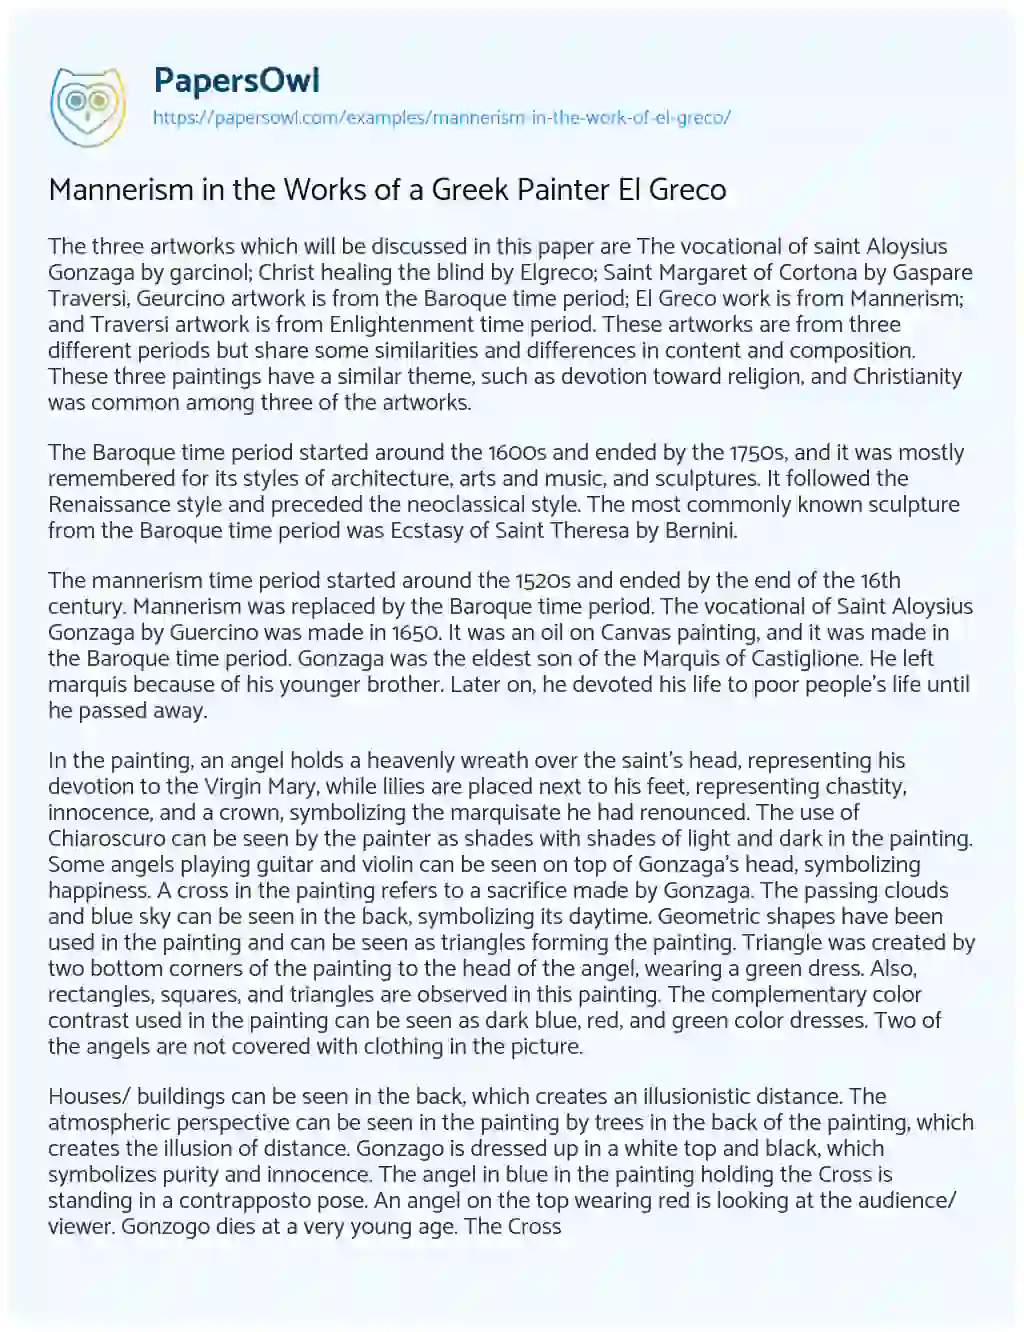 Essay on Mannerism in the Works of a Greek Painter El Greco